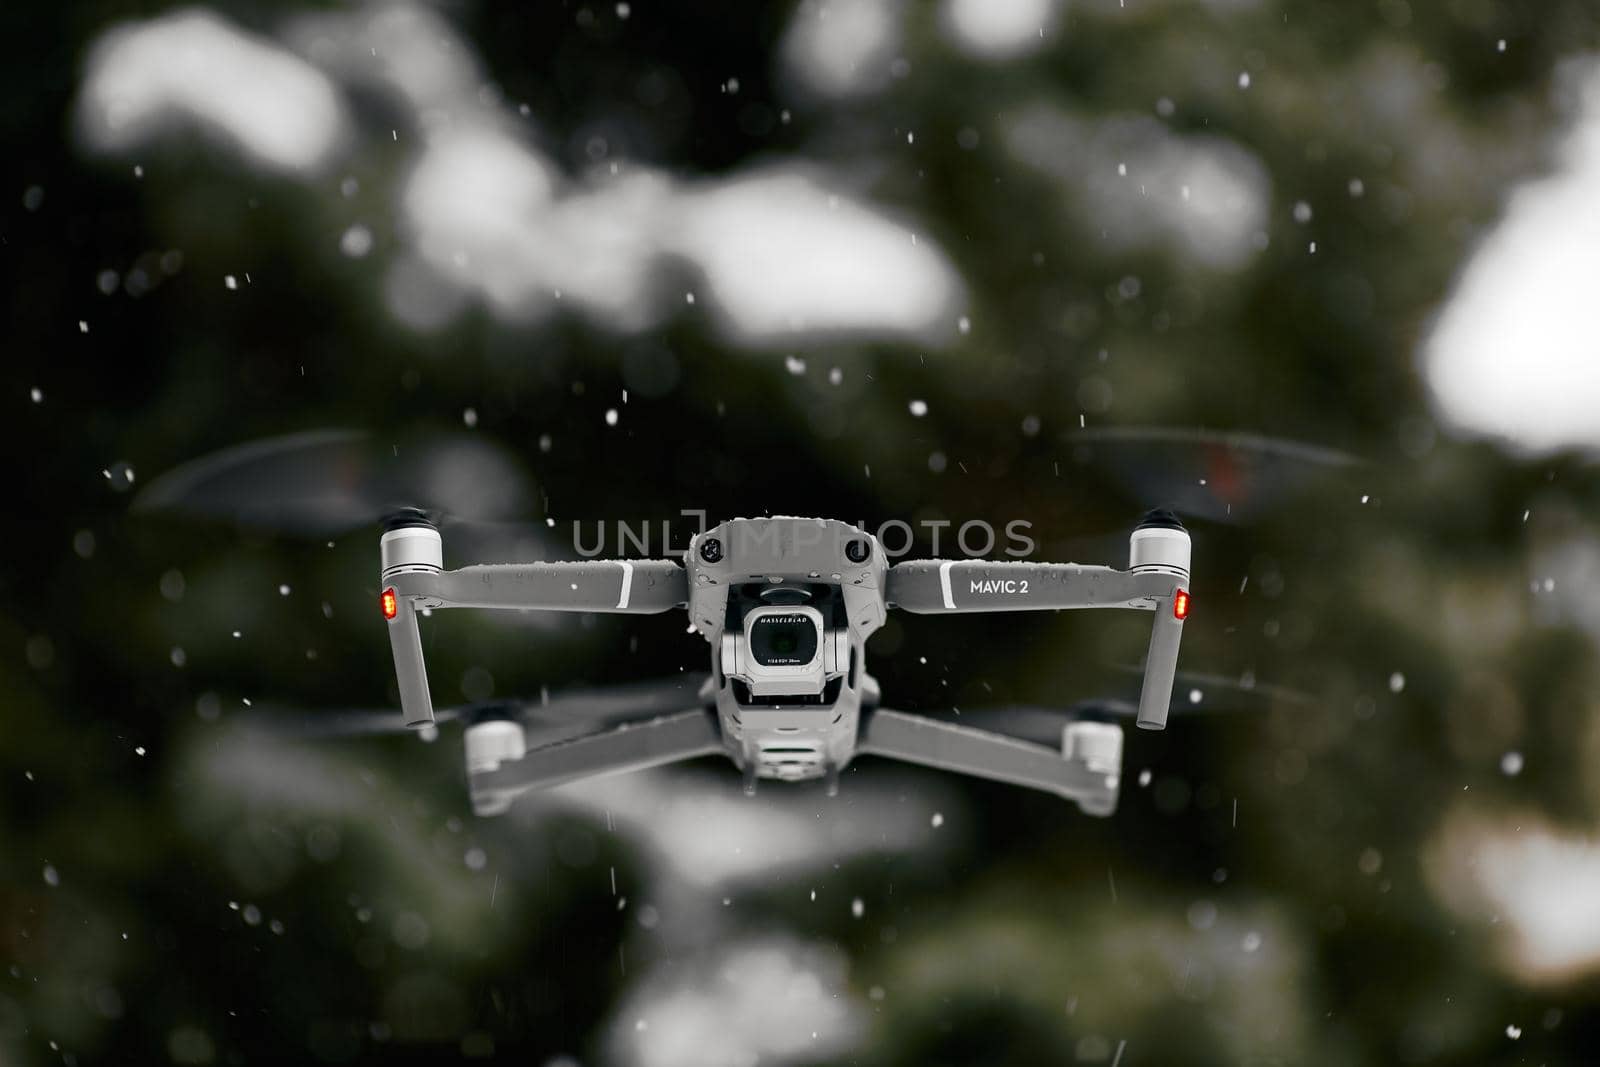 DJI Mavic 2 Pro, flying in wet snow conditions. DJI Mavic 2 Pro one of the most portable drones in the market, with Hasselblad camera. 07.12.2018 Rostov-on-Don, Russia